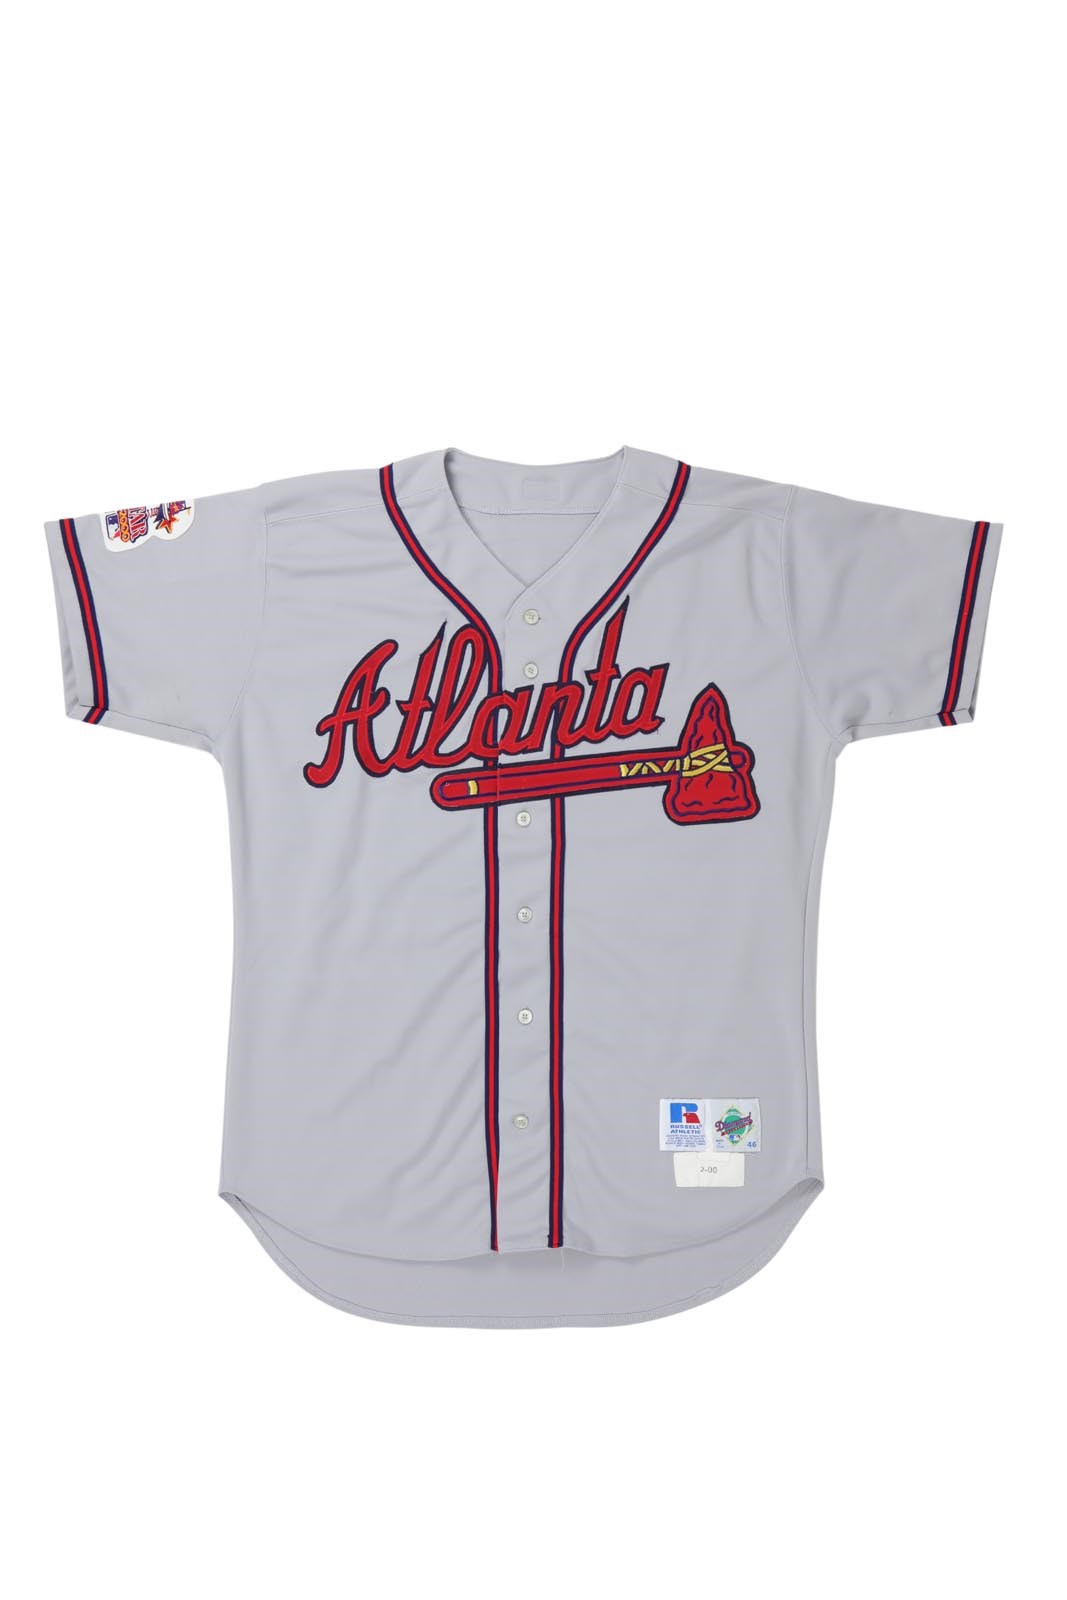 - 2000 George Lombard Atlanta Braves Game Worn Jersey w/All Star Game Patch